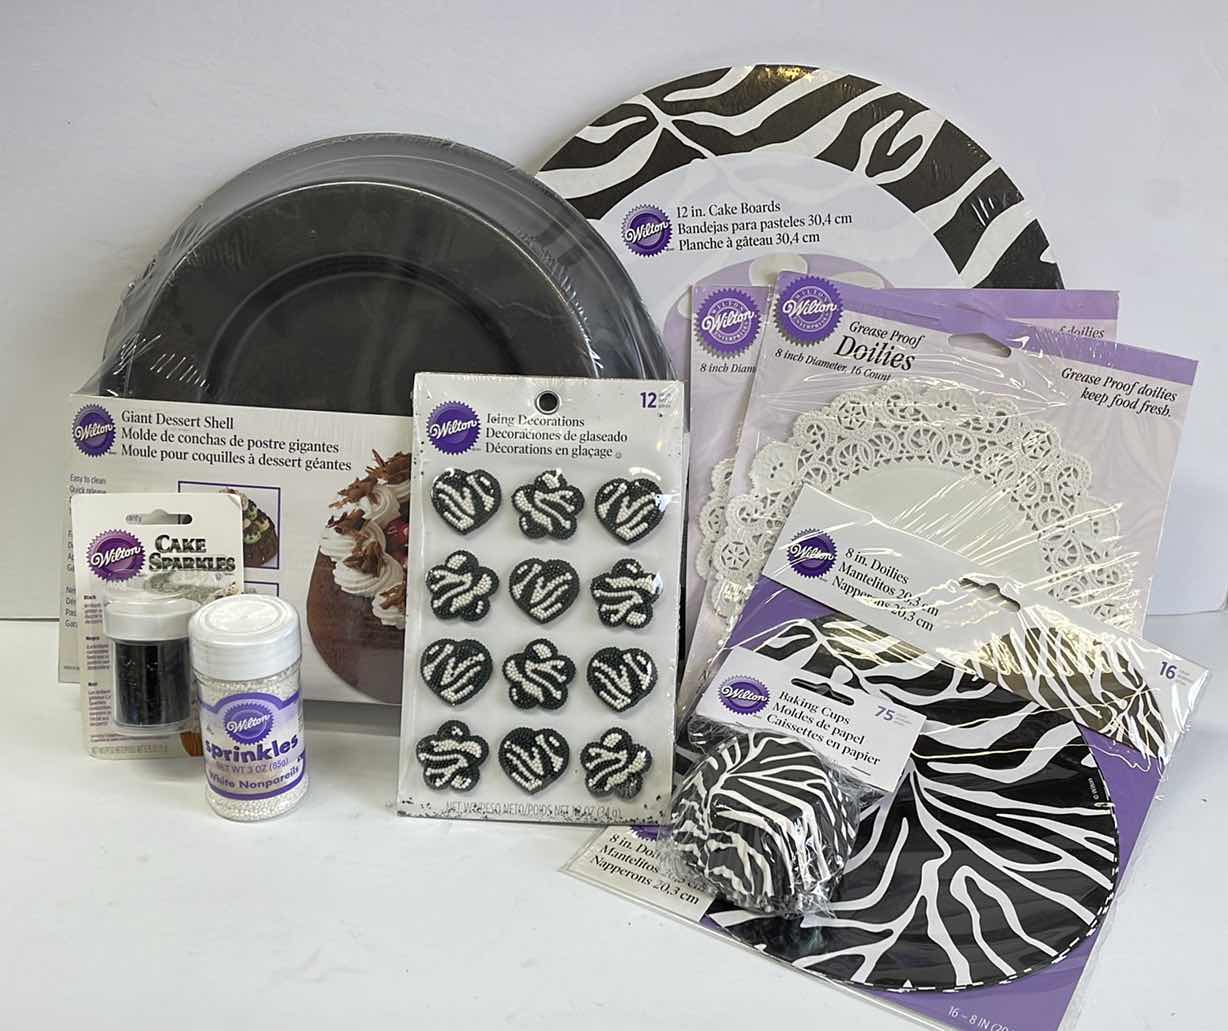 Photo 1 of NIB WILTON GIANT DESERT SHELL MOLD WITH PARTY ACCESSORIES - RETAIL PRICE $50.00